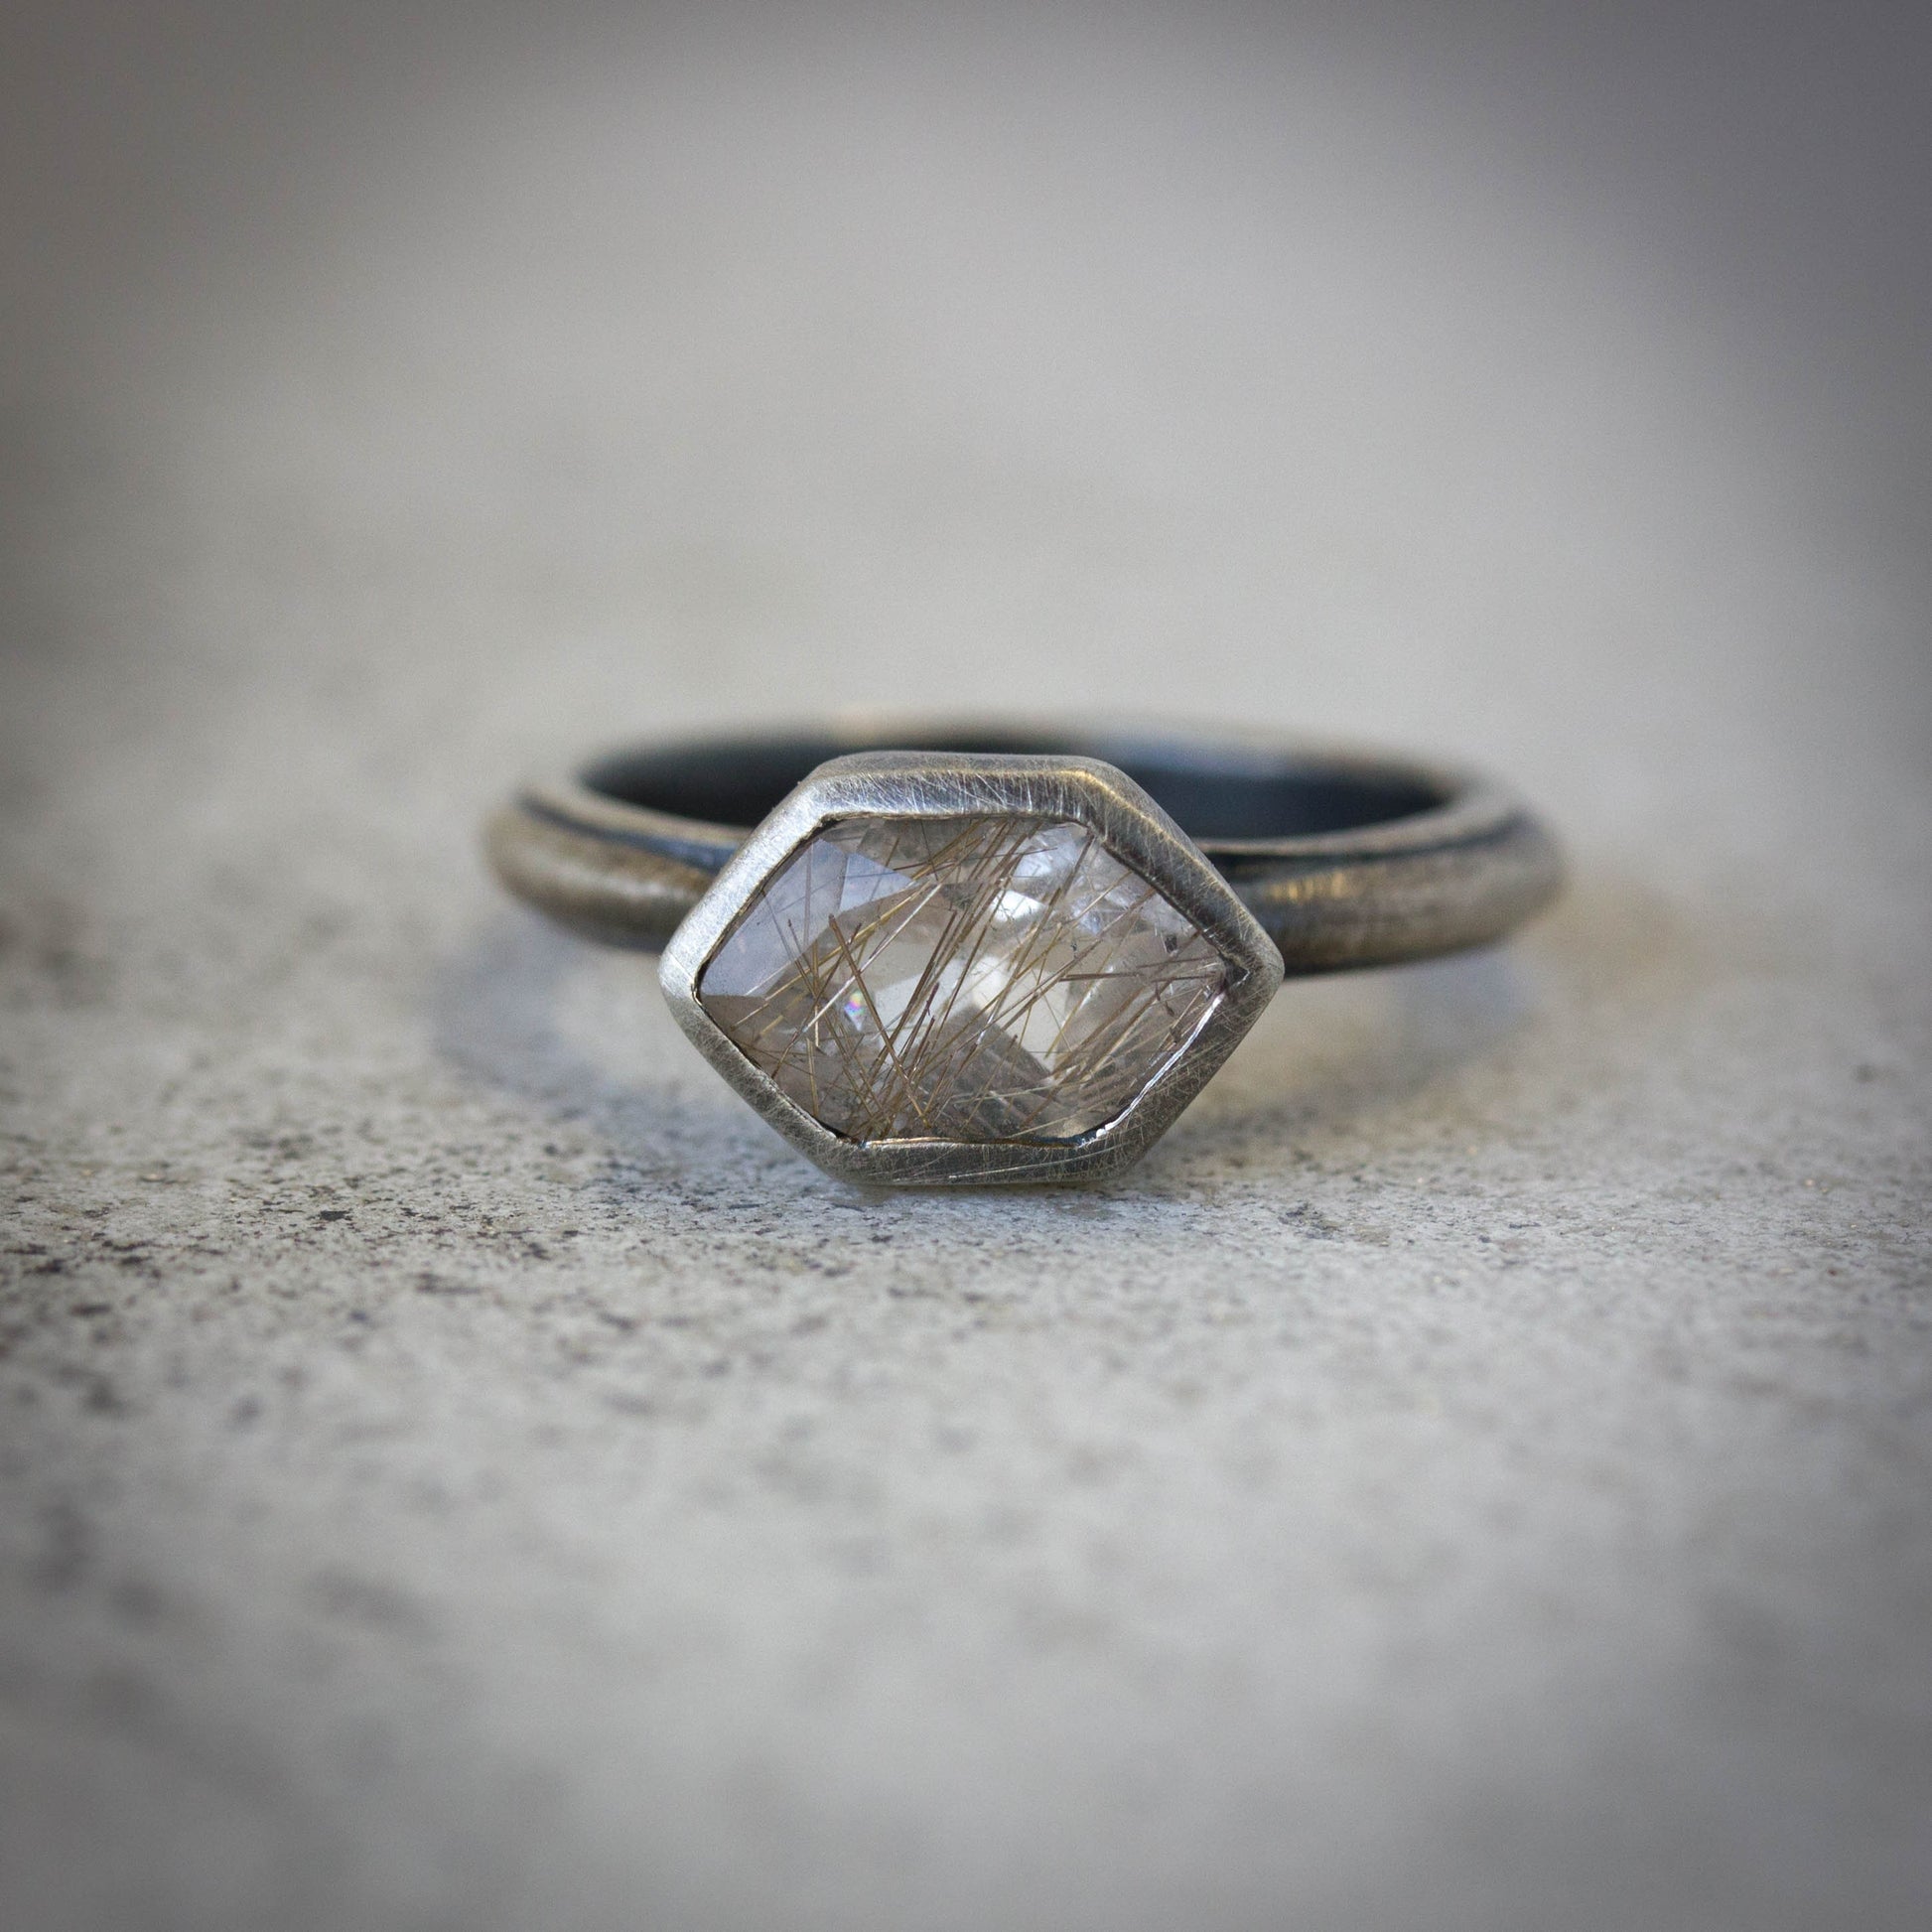 A handmade Rutilated Quartz Statement Ring with Antique Brushed Finish with a hexagonal shape.